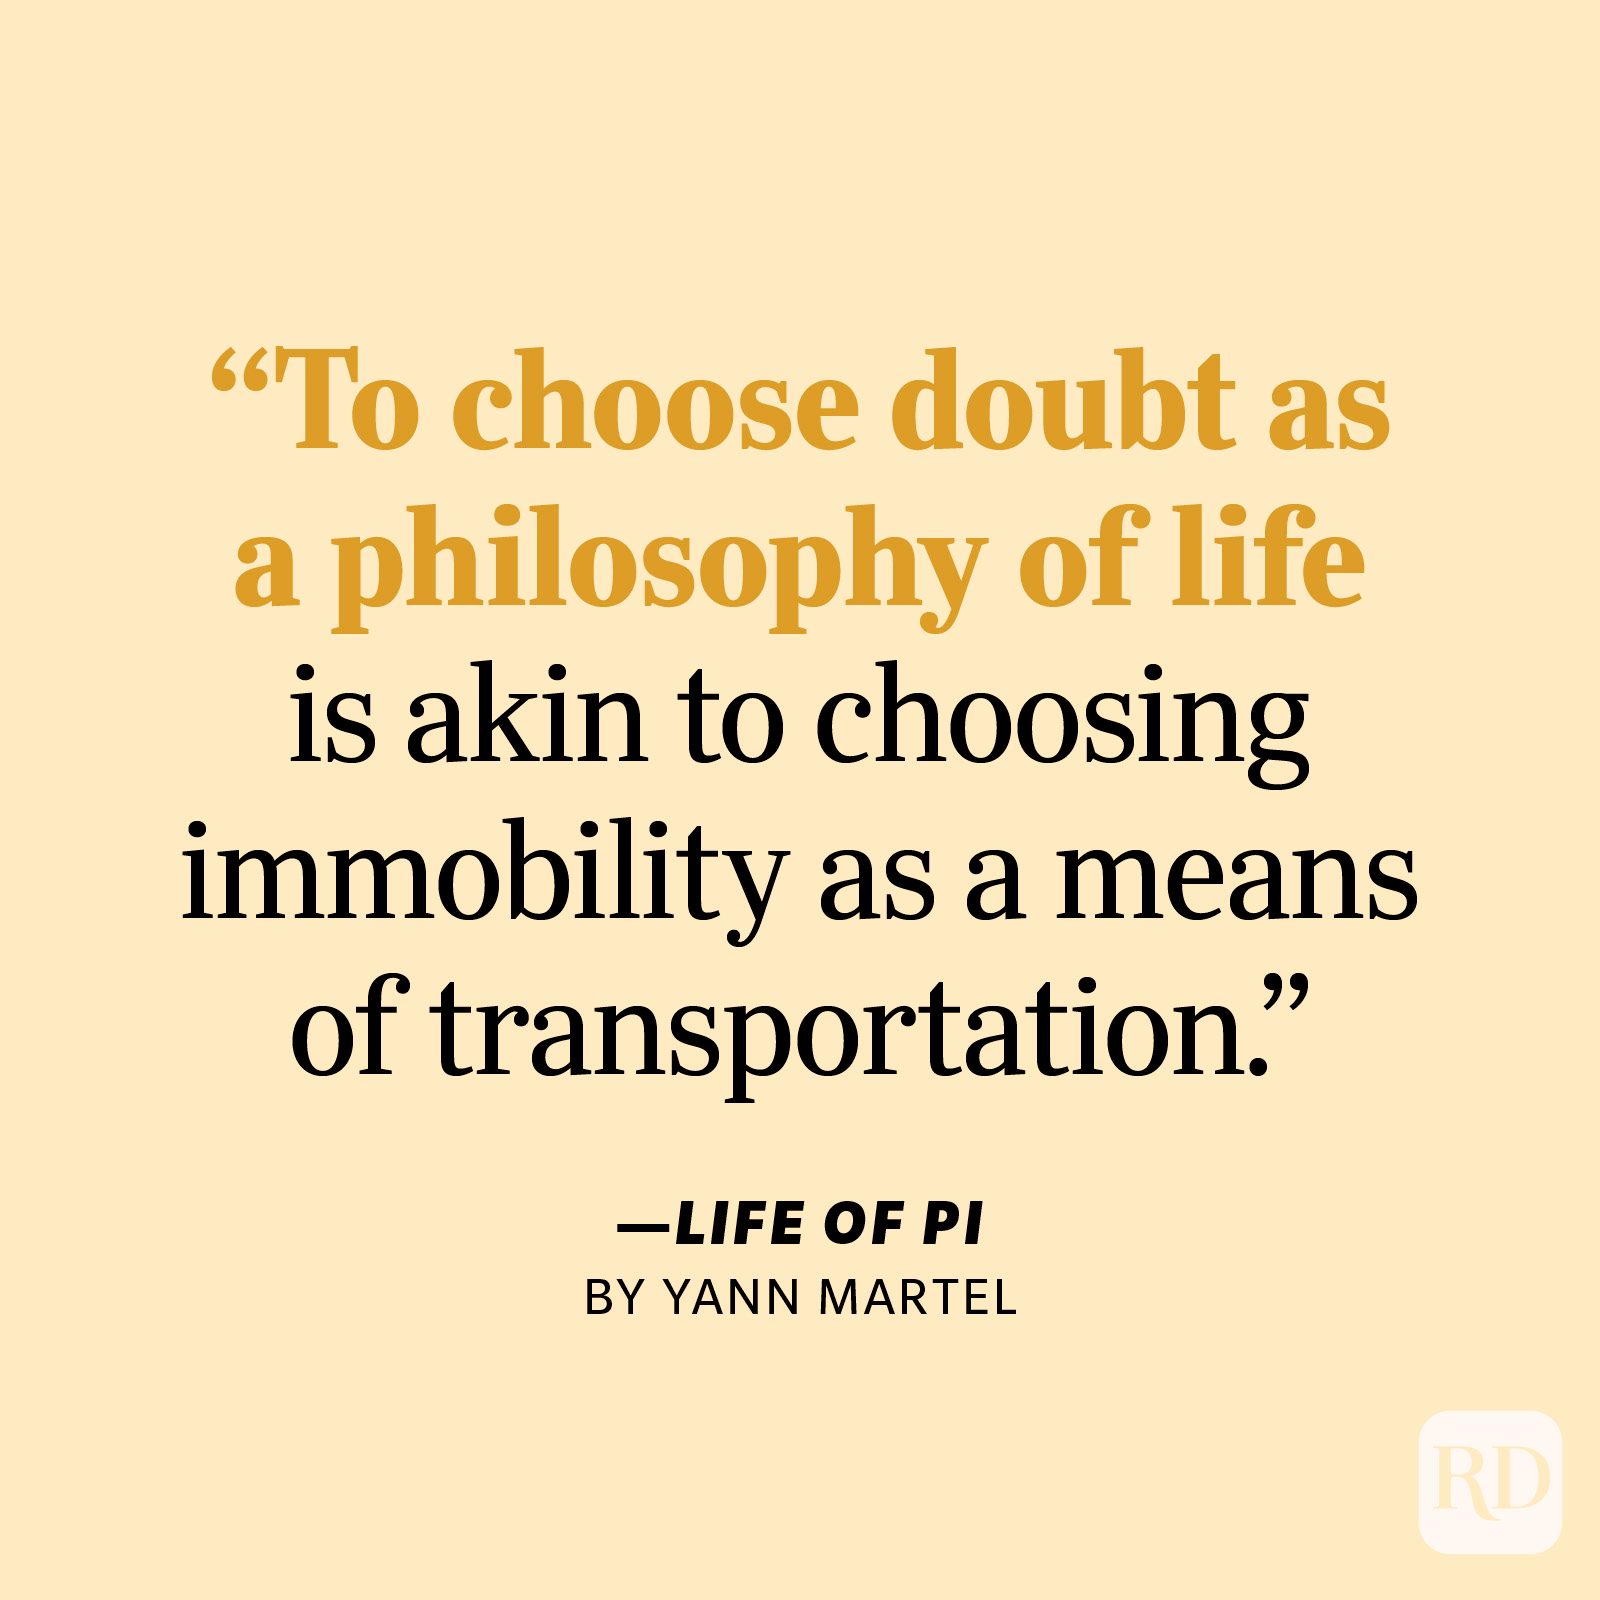 Life of Pi by Yann Martel "To choose doubt as a philosophy of life is akin to choosing immobility as a means of transportation."